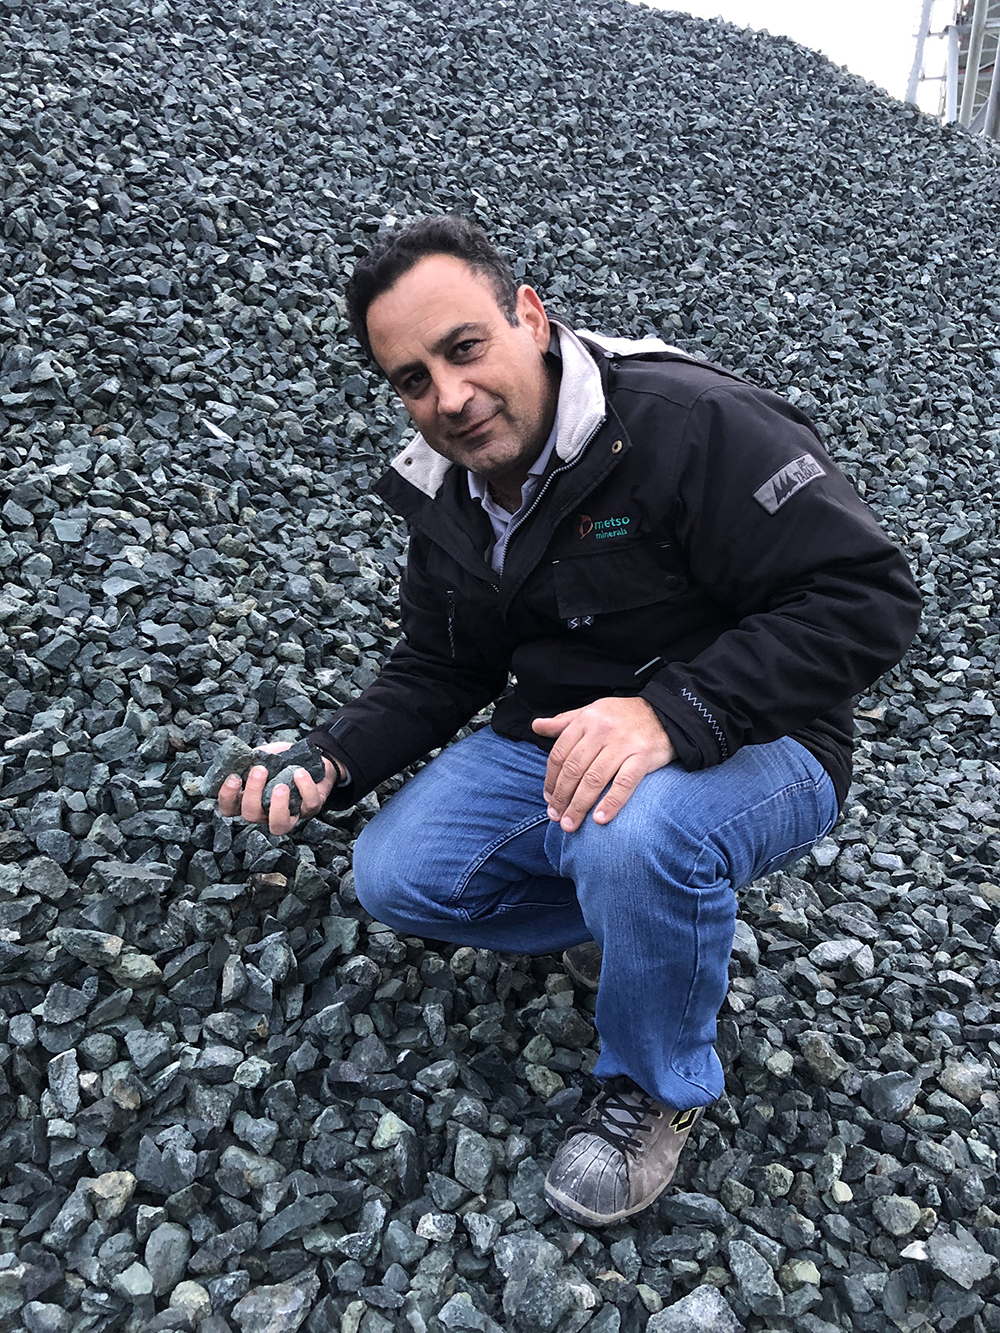 Latomio Pyrgon quarry produced 360,000 tonnes of diabase rock aggregates of various sizes and sand in 2019, mainly for concrete plant customers